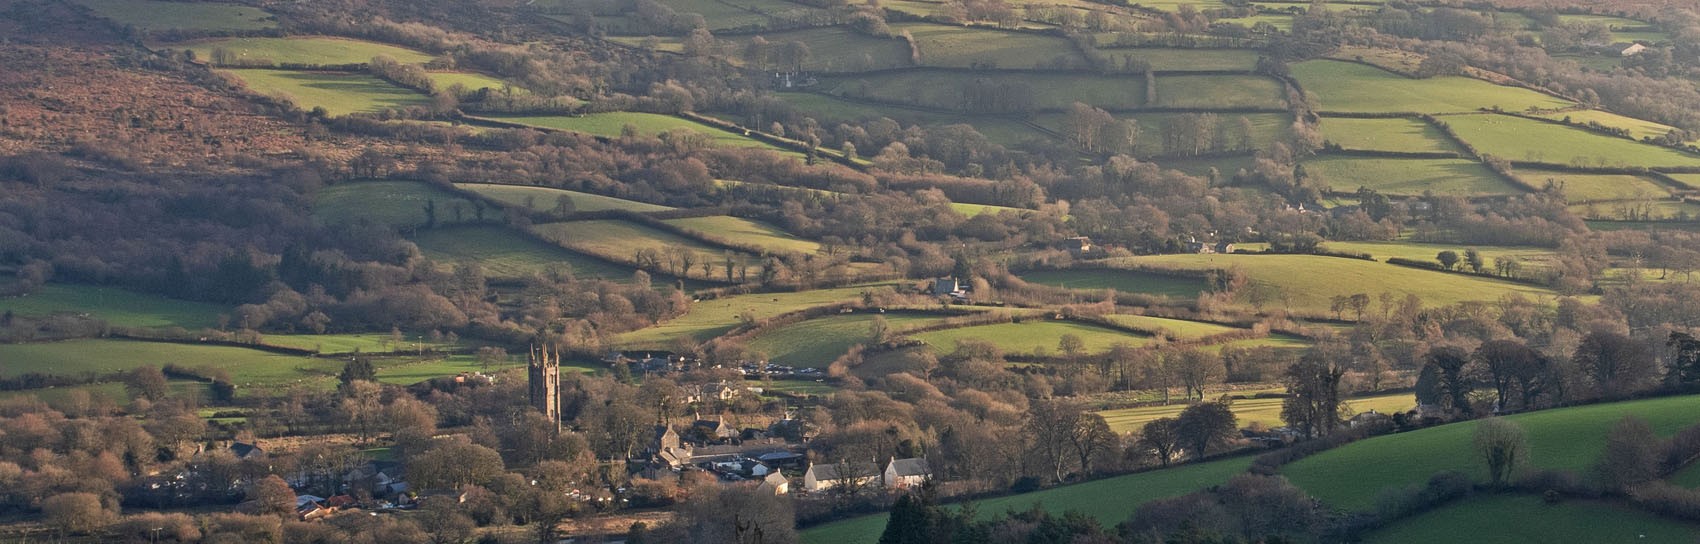 Widecombe in the  Moor. Photograph by ALEX GRAEME